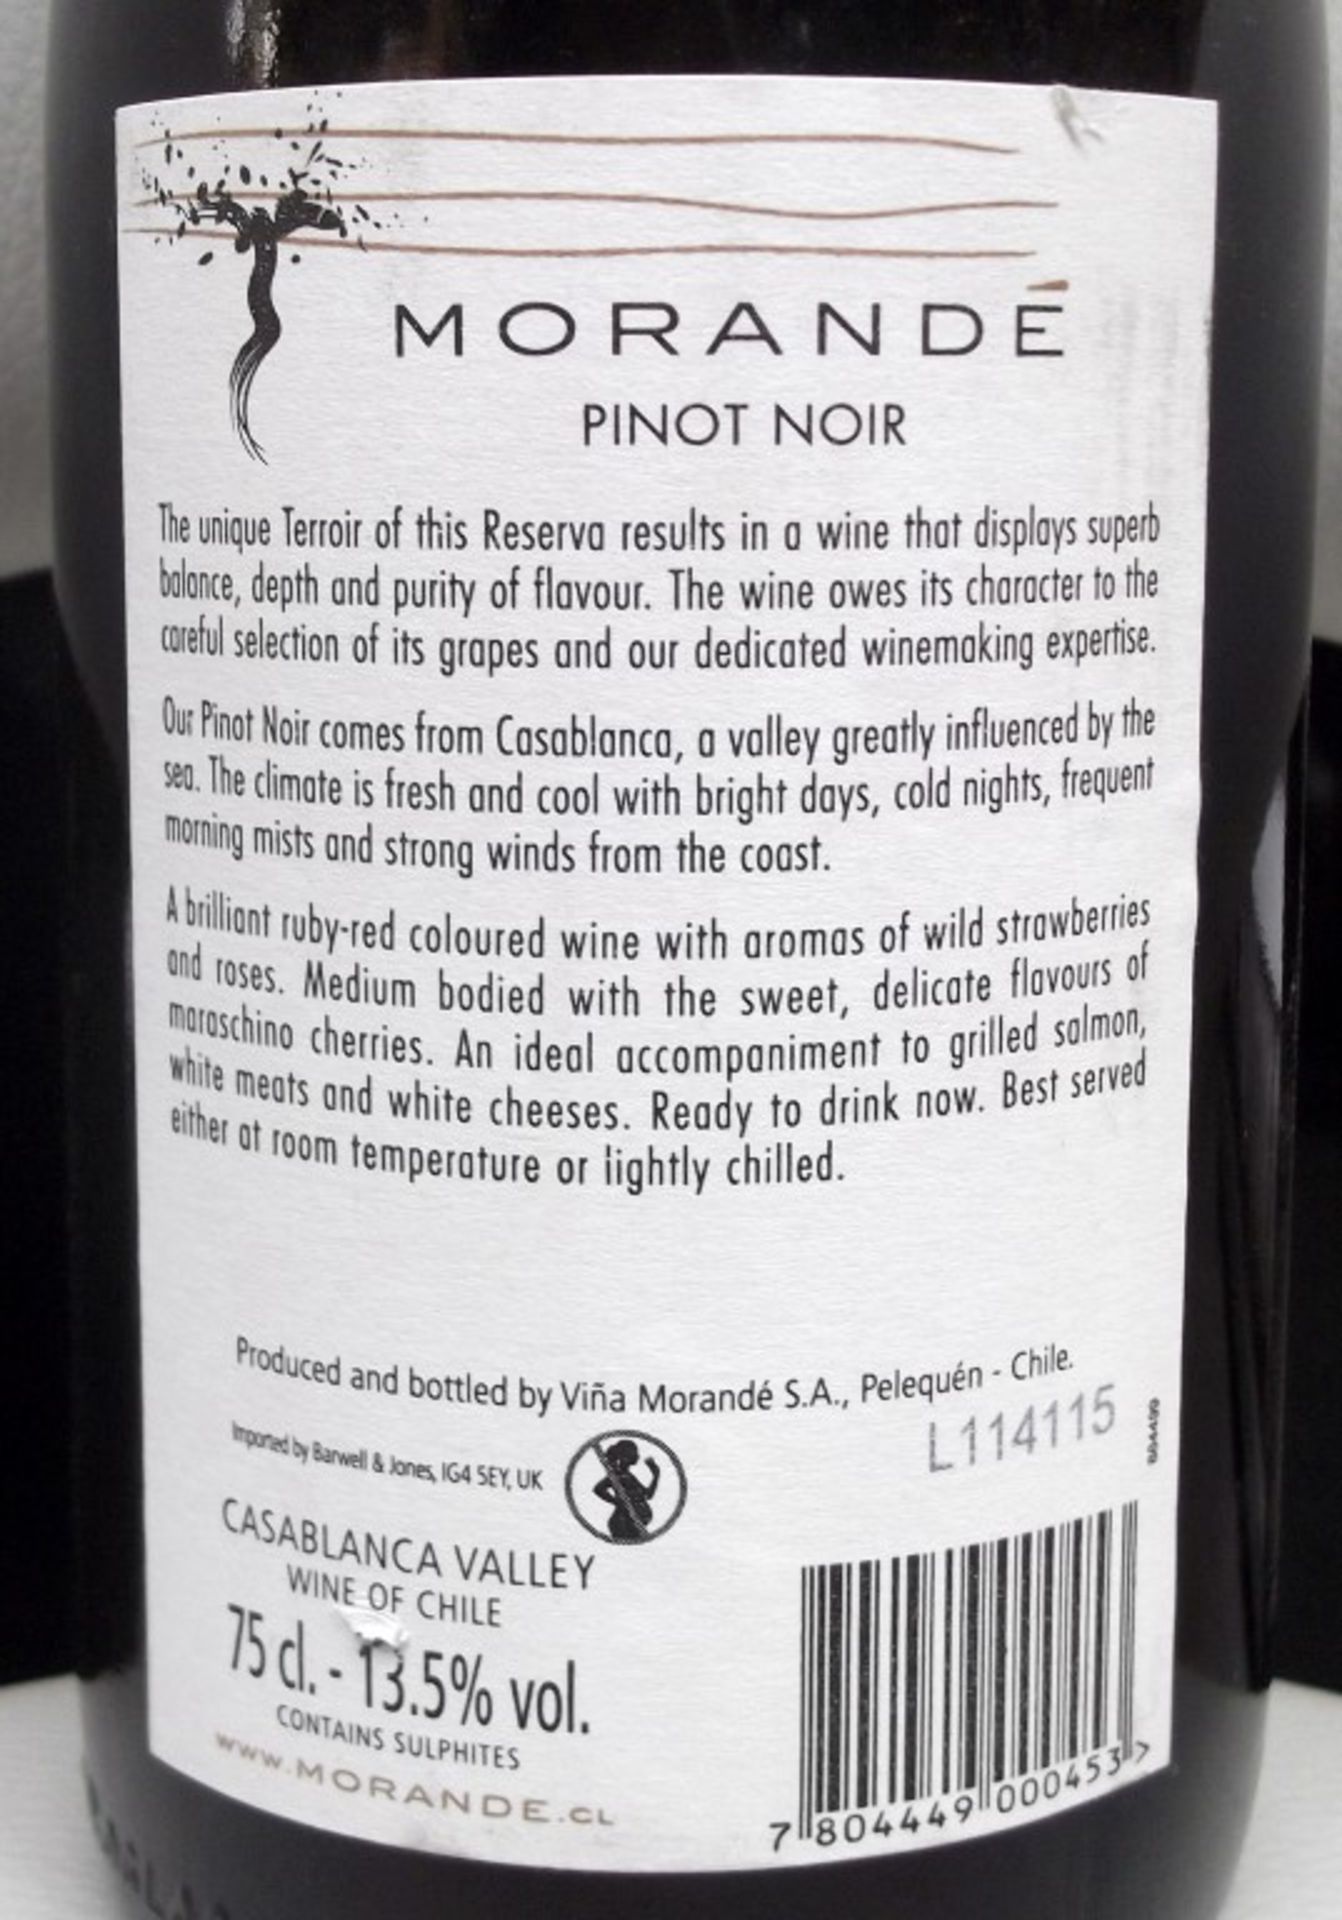 4 x Morande Gran Reserva Pinot Noir, Casablanca Valley, Chile - Year 2011 - Bottle Size 75cl - - Image 2 of 3